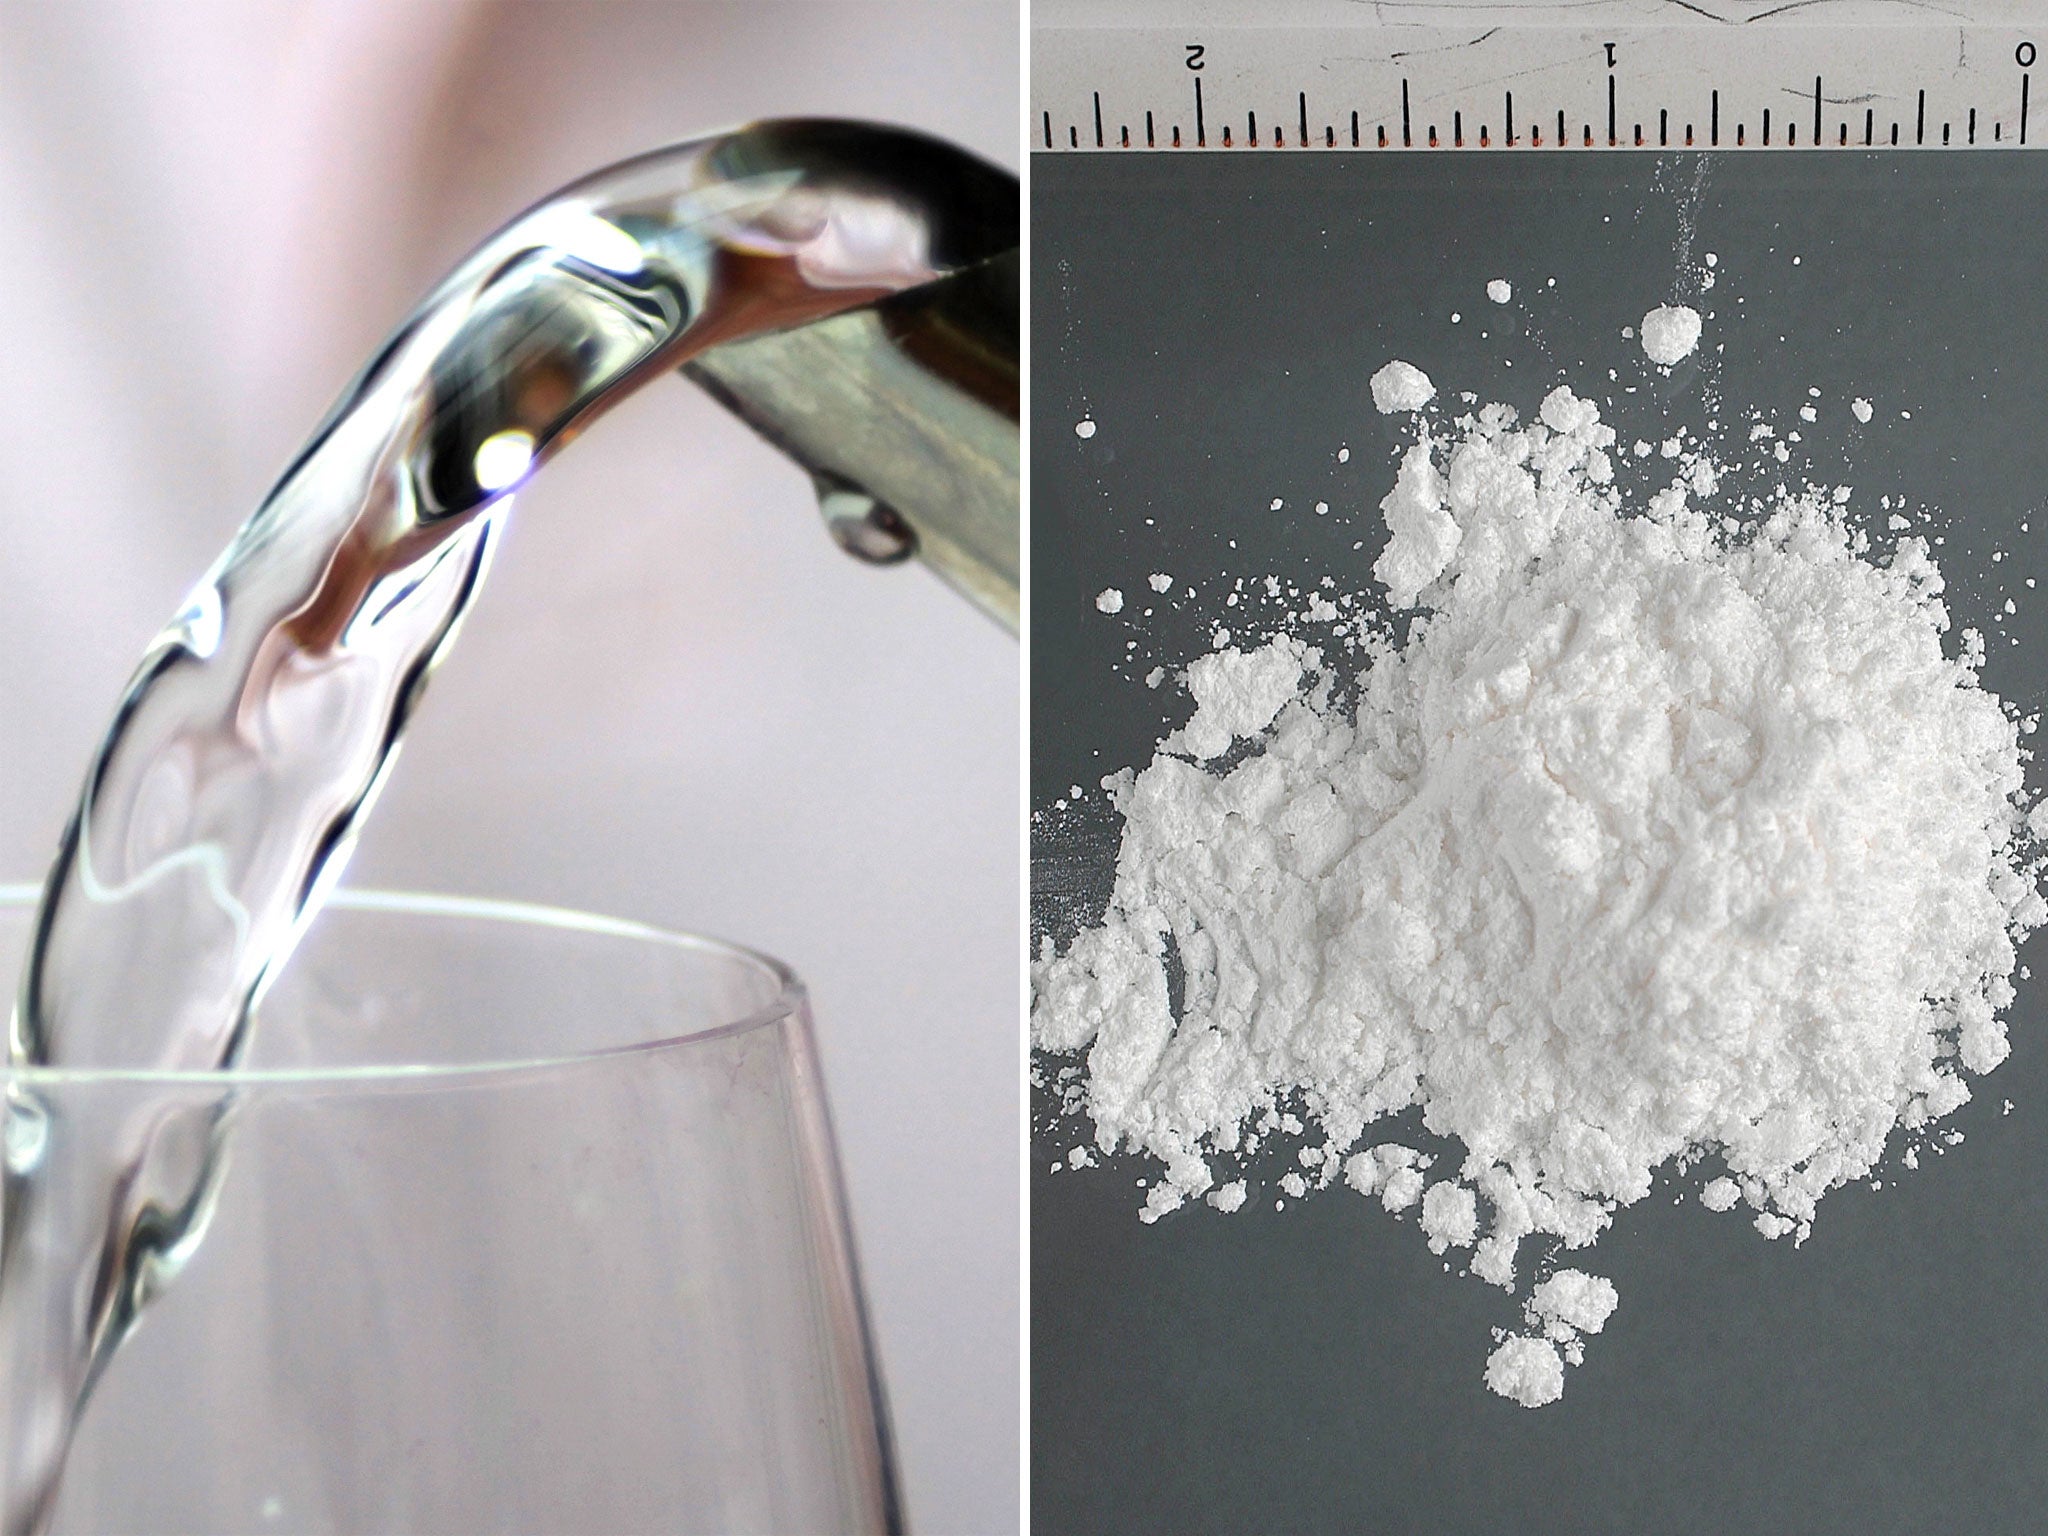 Cocaine use is now so high in Britain that even our drinking water has become contaminated, according to a report